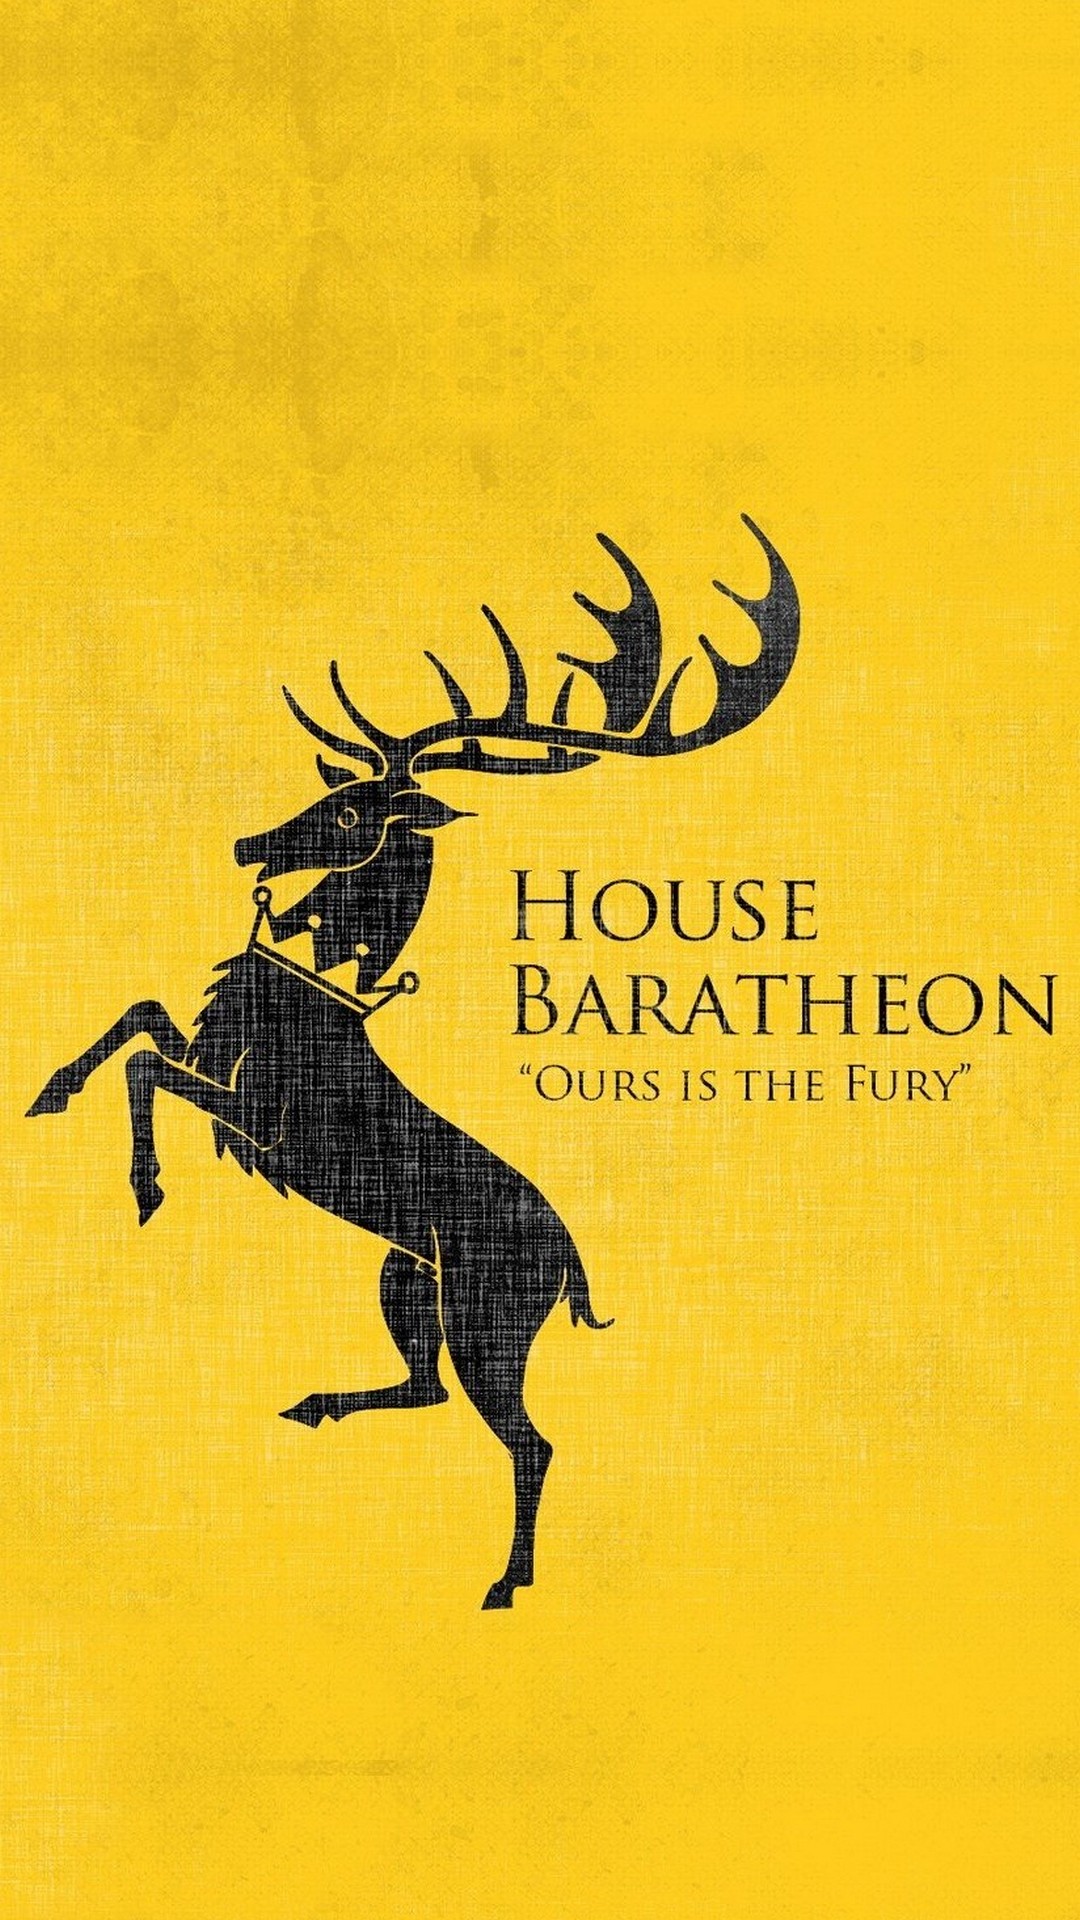 House Baratheon Game of Thrones iPhone Wallpaper With high-resolution 1080X1920 pixel. You can use this wallpaper for your iPhone 5, 6, 7, 8, X, XS, XR backgrounds, Mobile Screensaver, or iPad Lock Screen